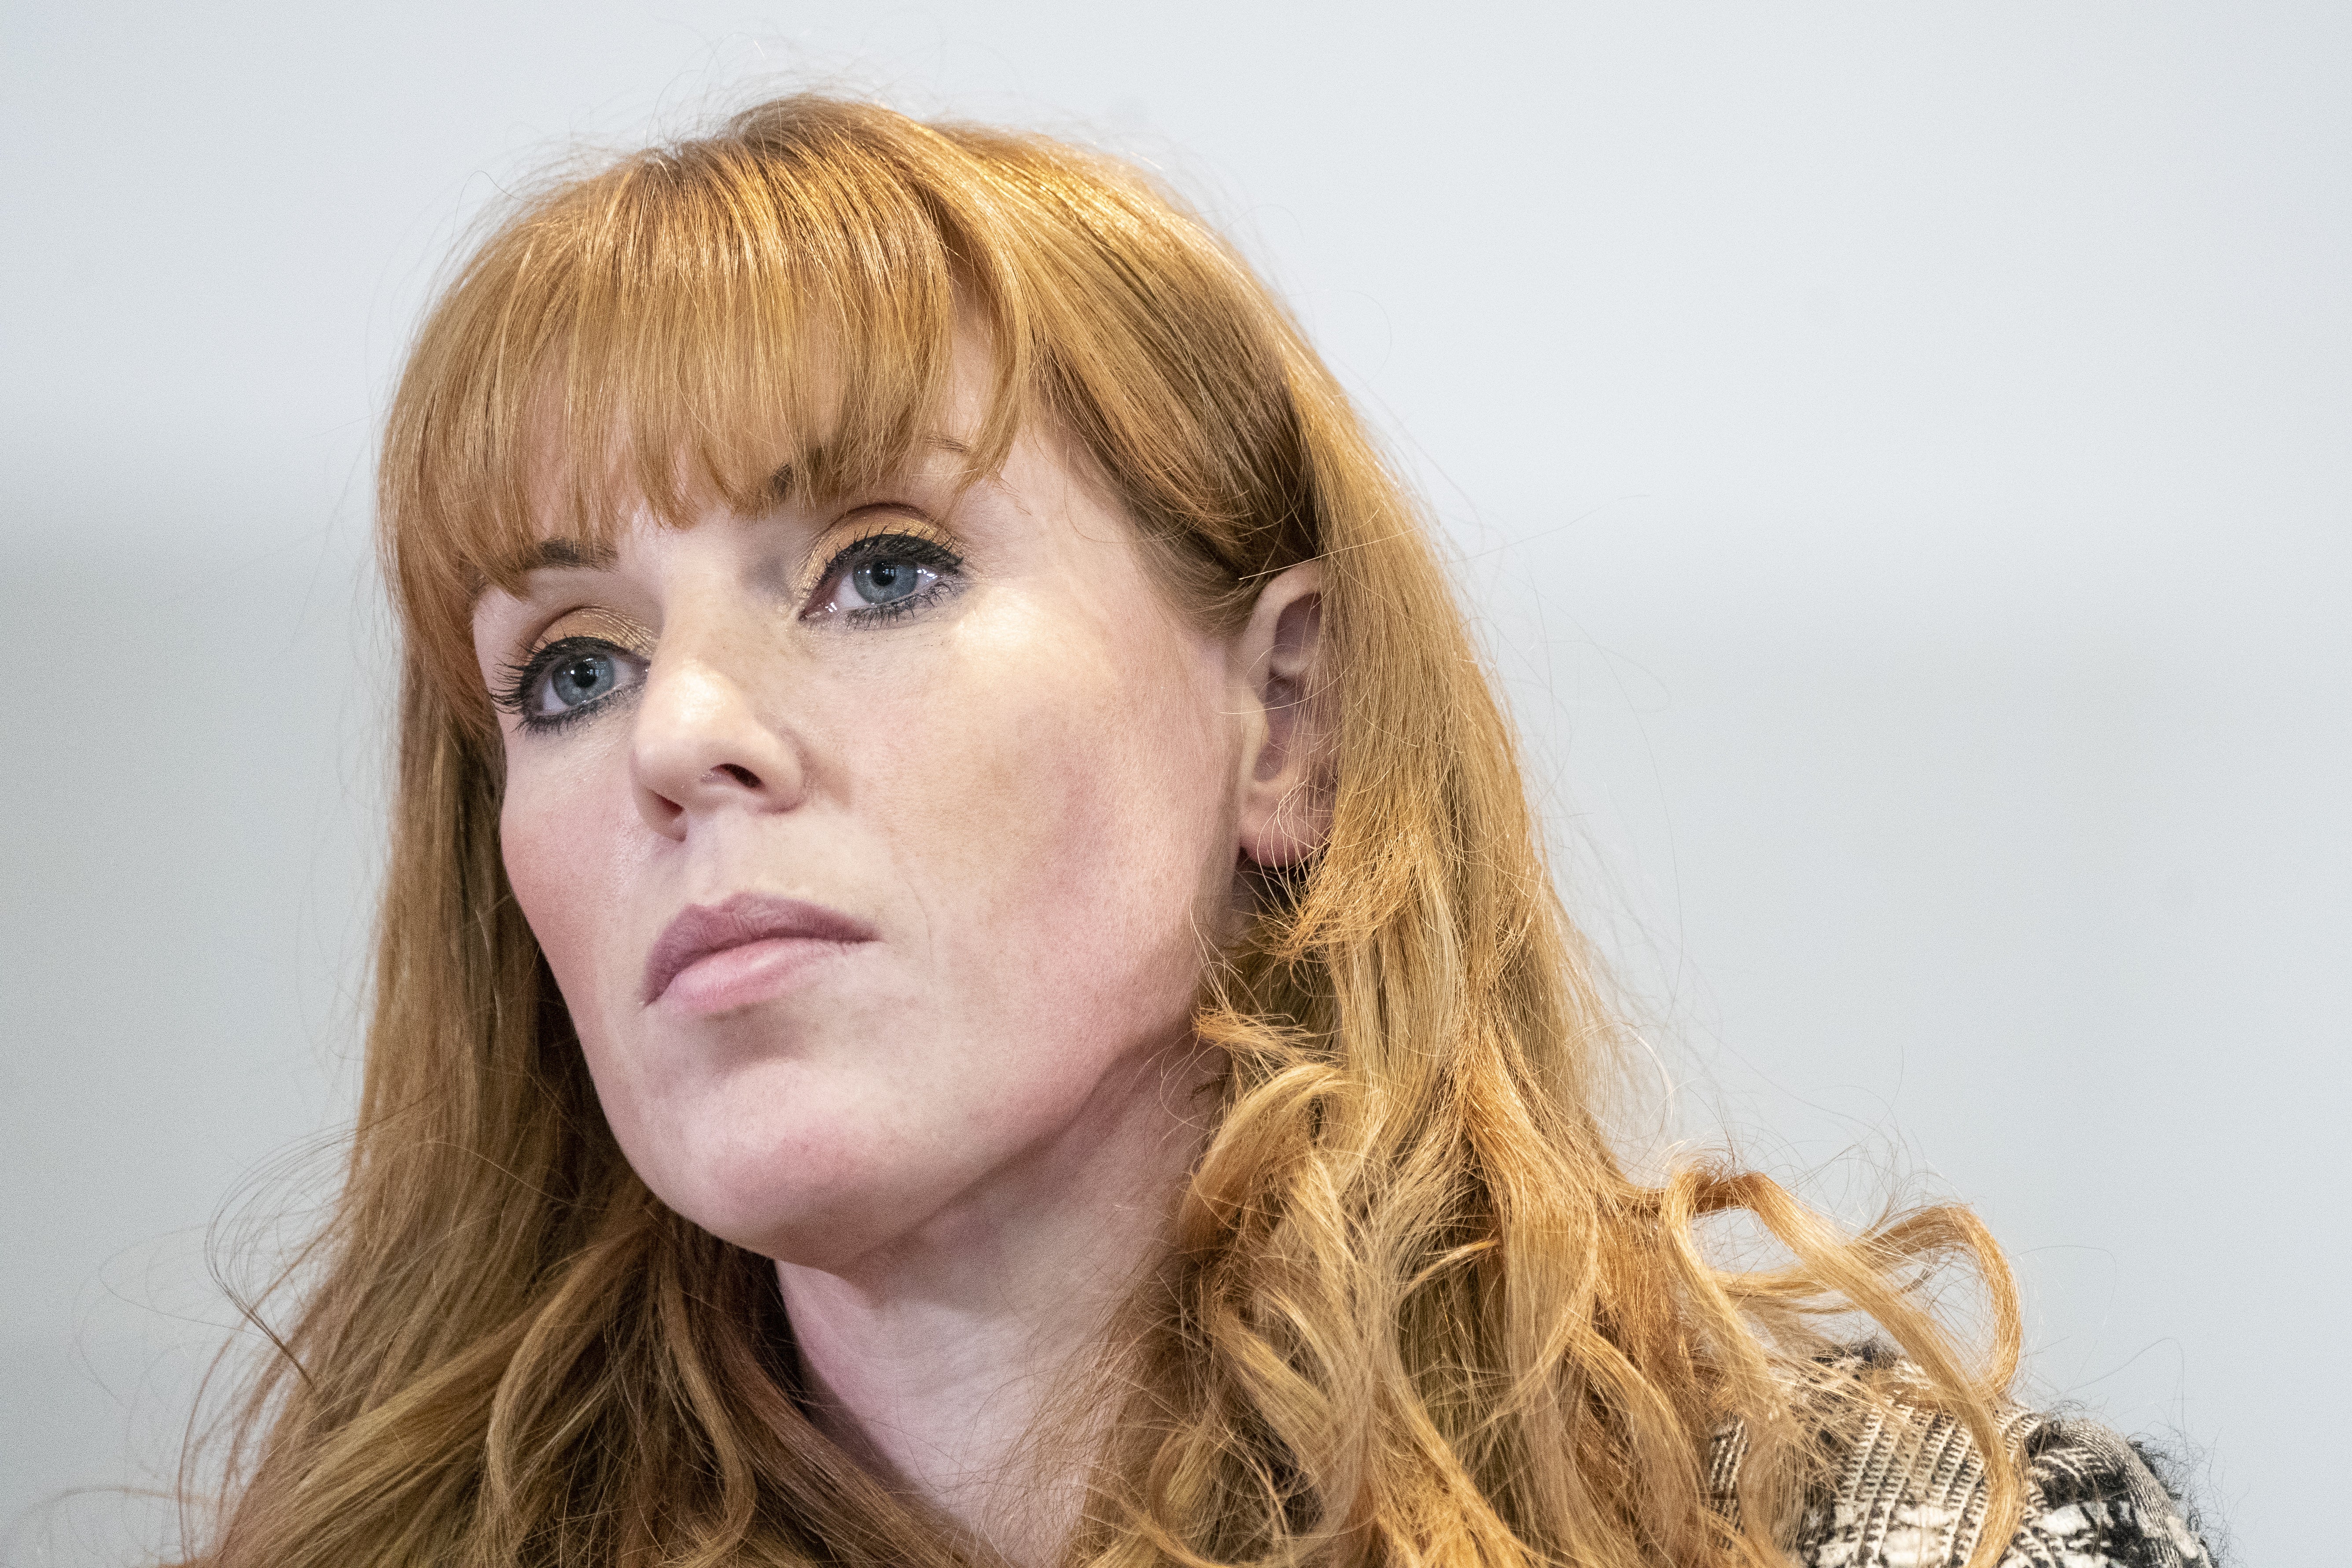 Deputy leader Angela Rayner has also said she will quit if she is fined (Dominic Lipinski/PA)